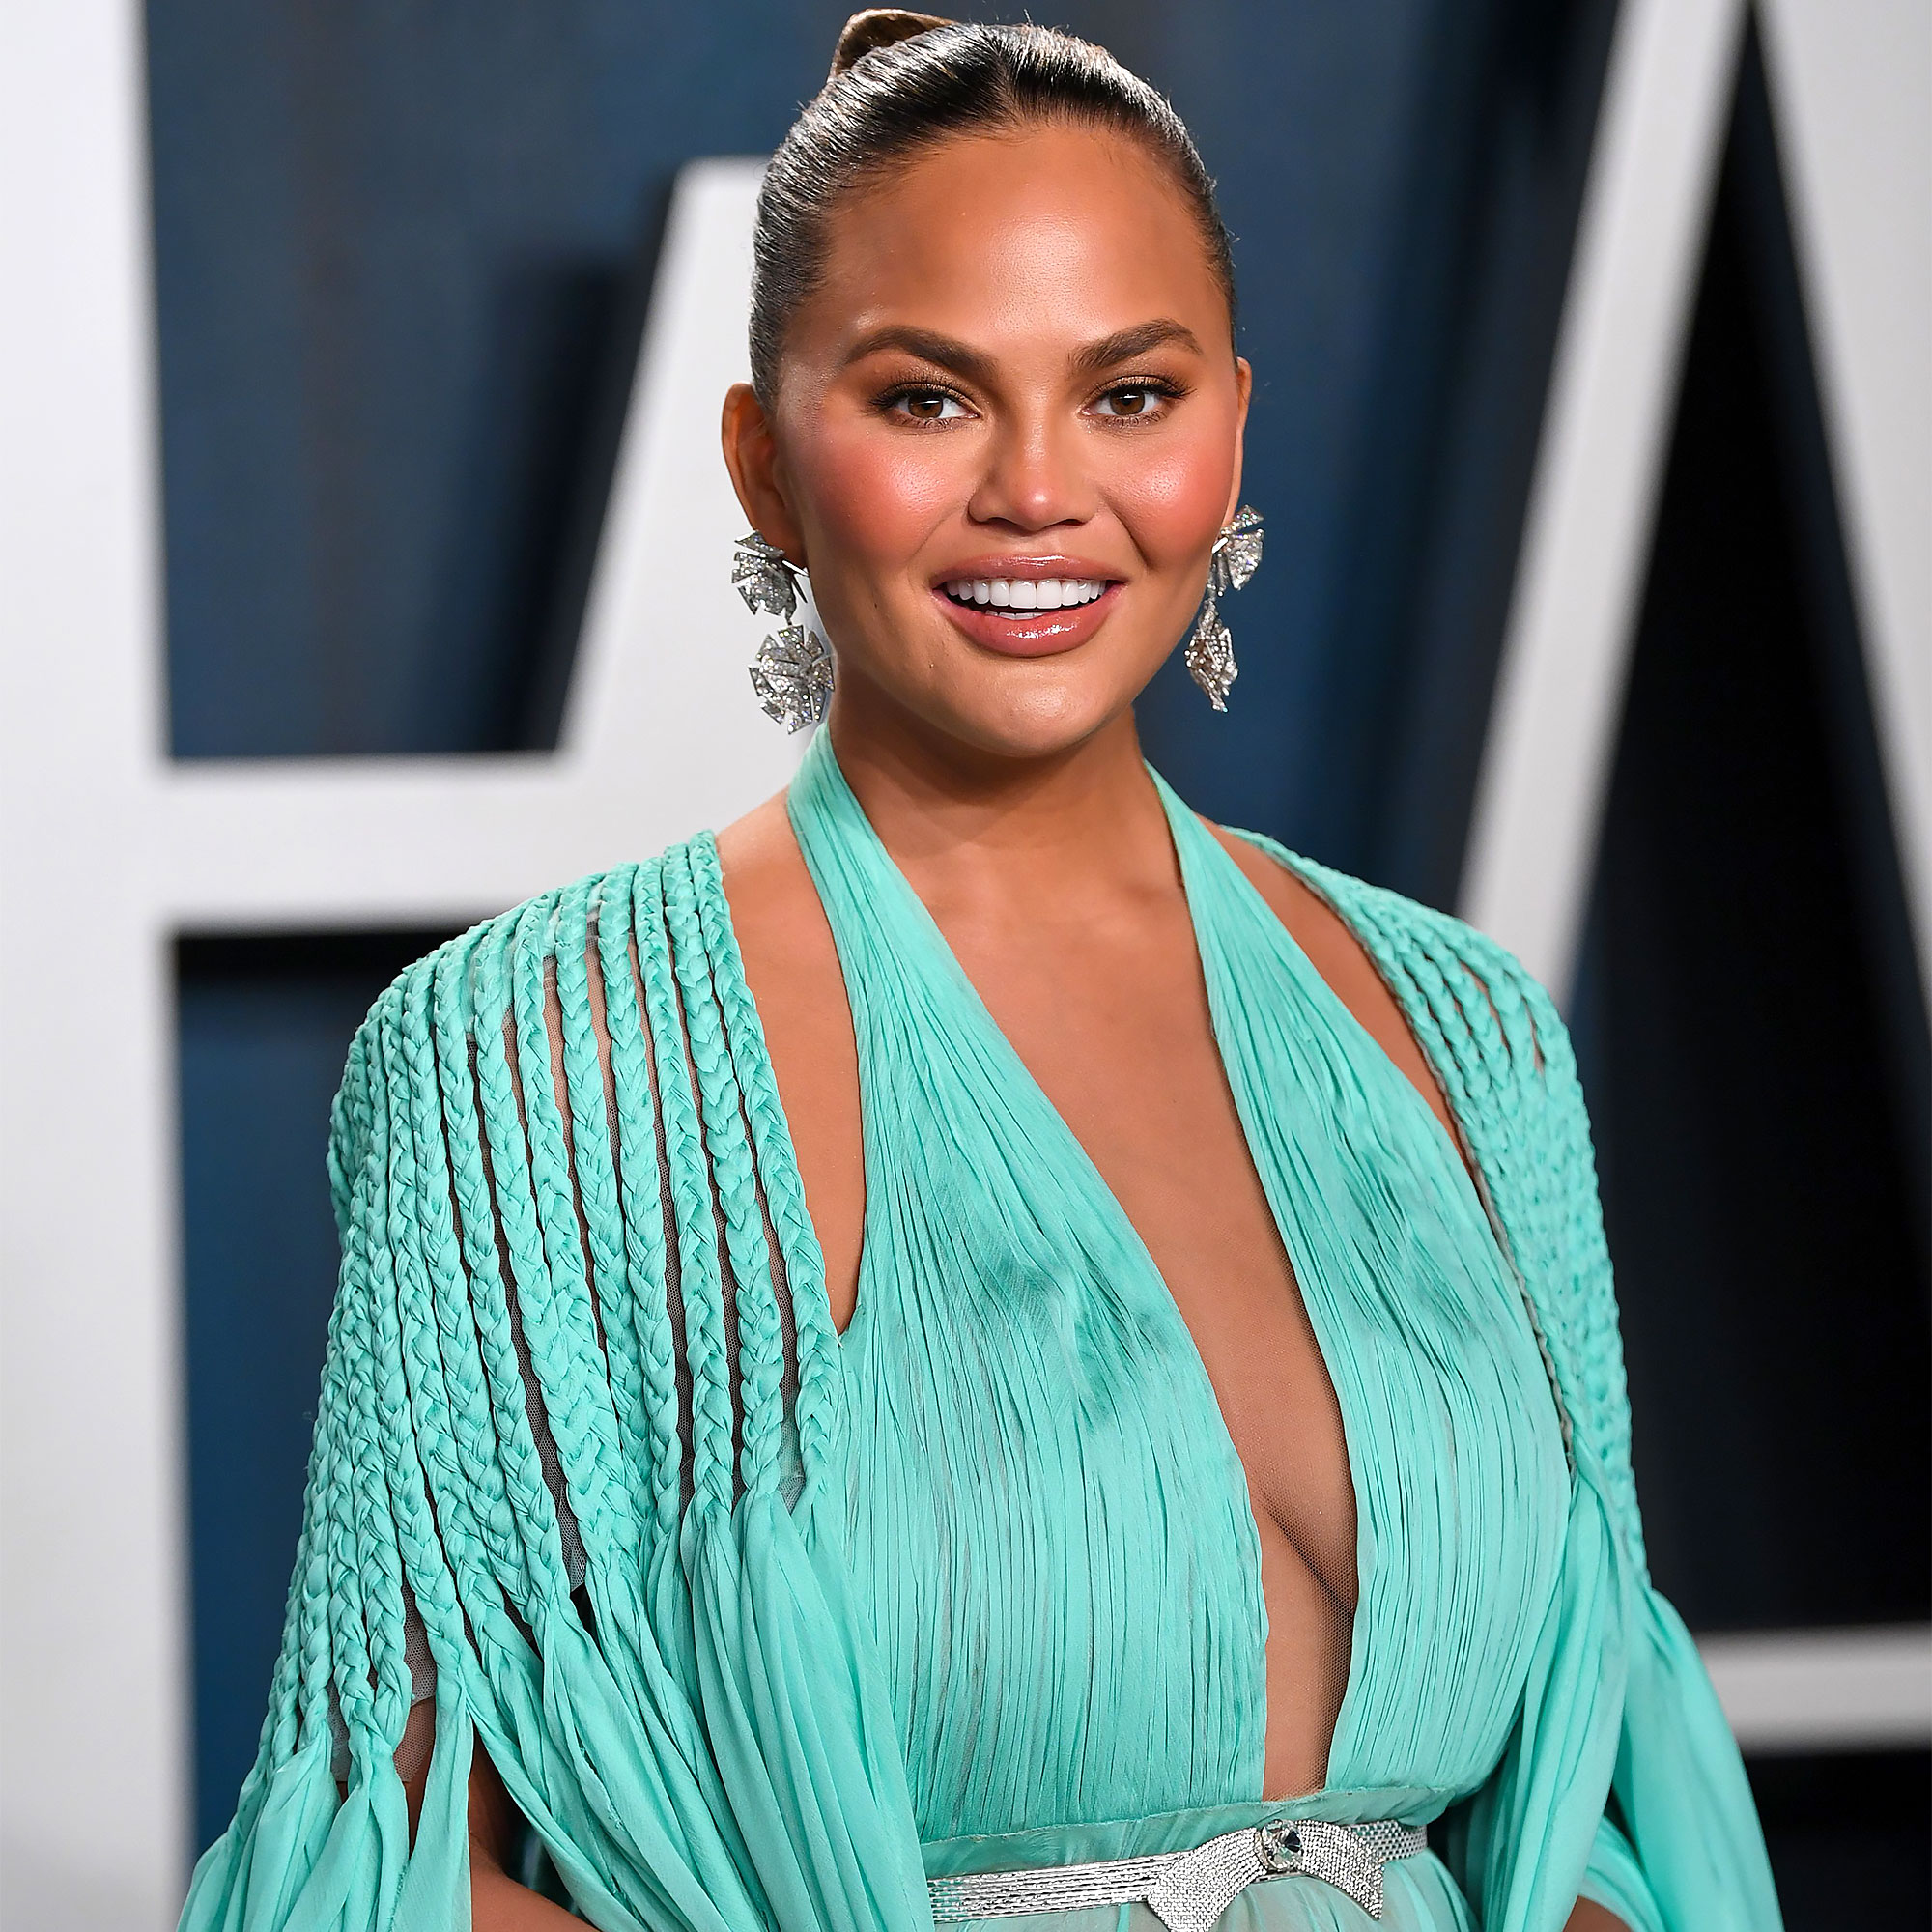 https://www.usmagazine.com/wp-content/uploads/2021/09/Chrissy-Teigen-Reveals-Results-Fat-Removal-Surgery-Her-Face-001.jpg?quality=55&strip=all